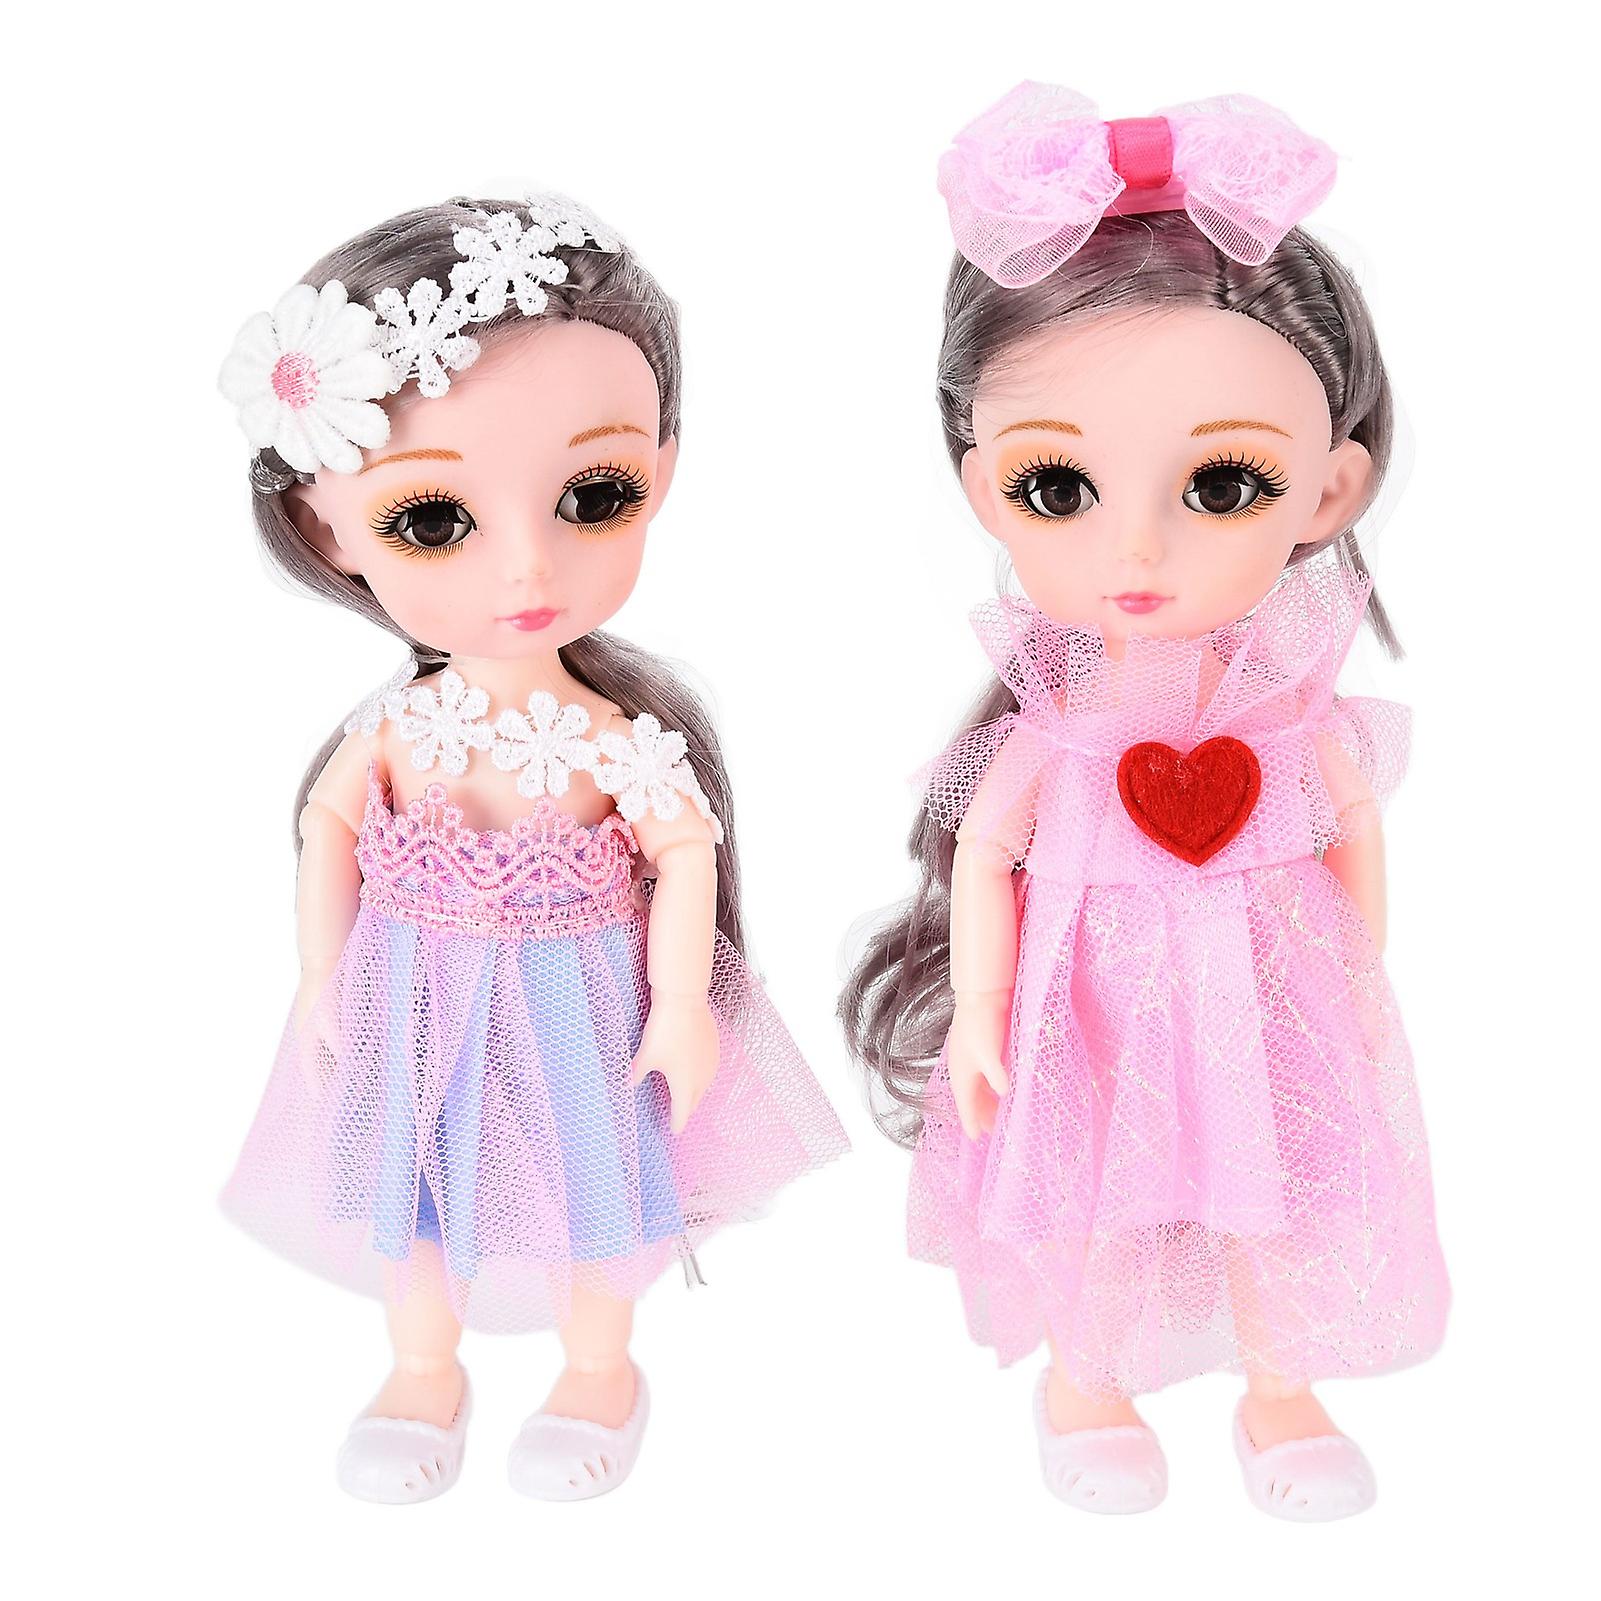 2pcs Girl Doll Toys Movable Joints Beautiful Diy Dress Up Dolls With Hairpin Shoes For Above 3 Years Old